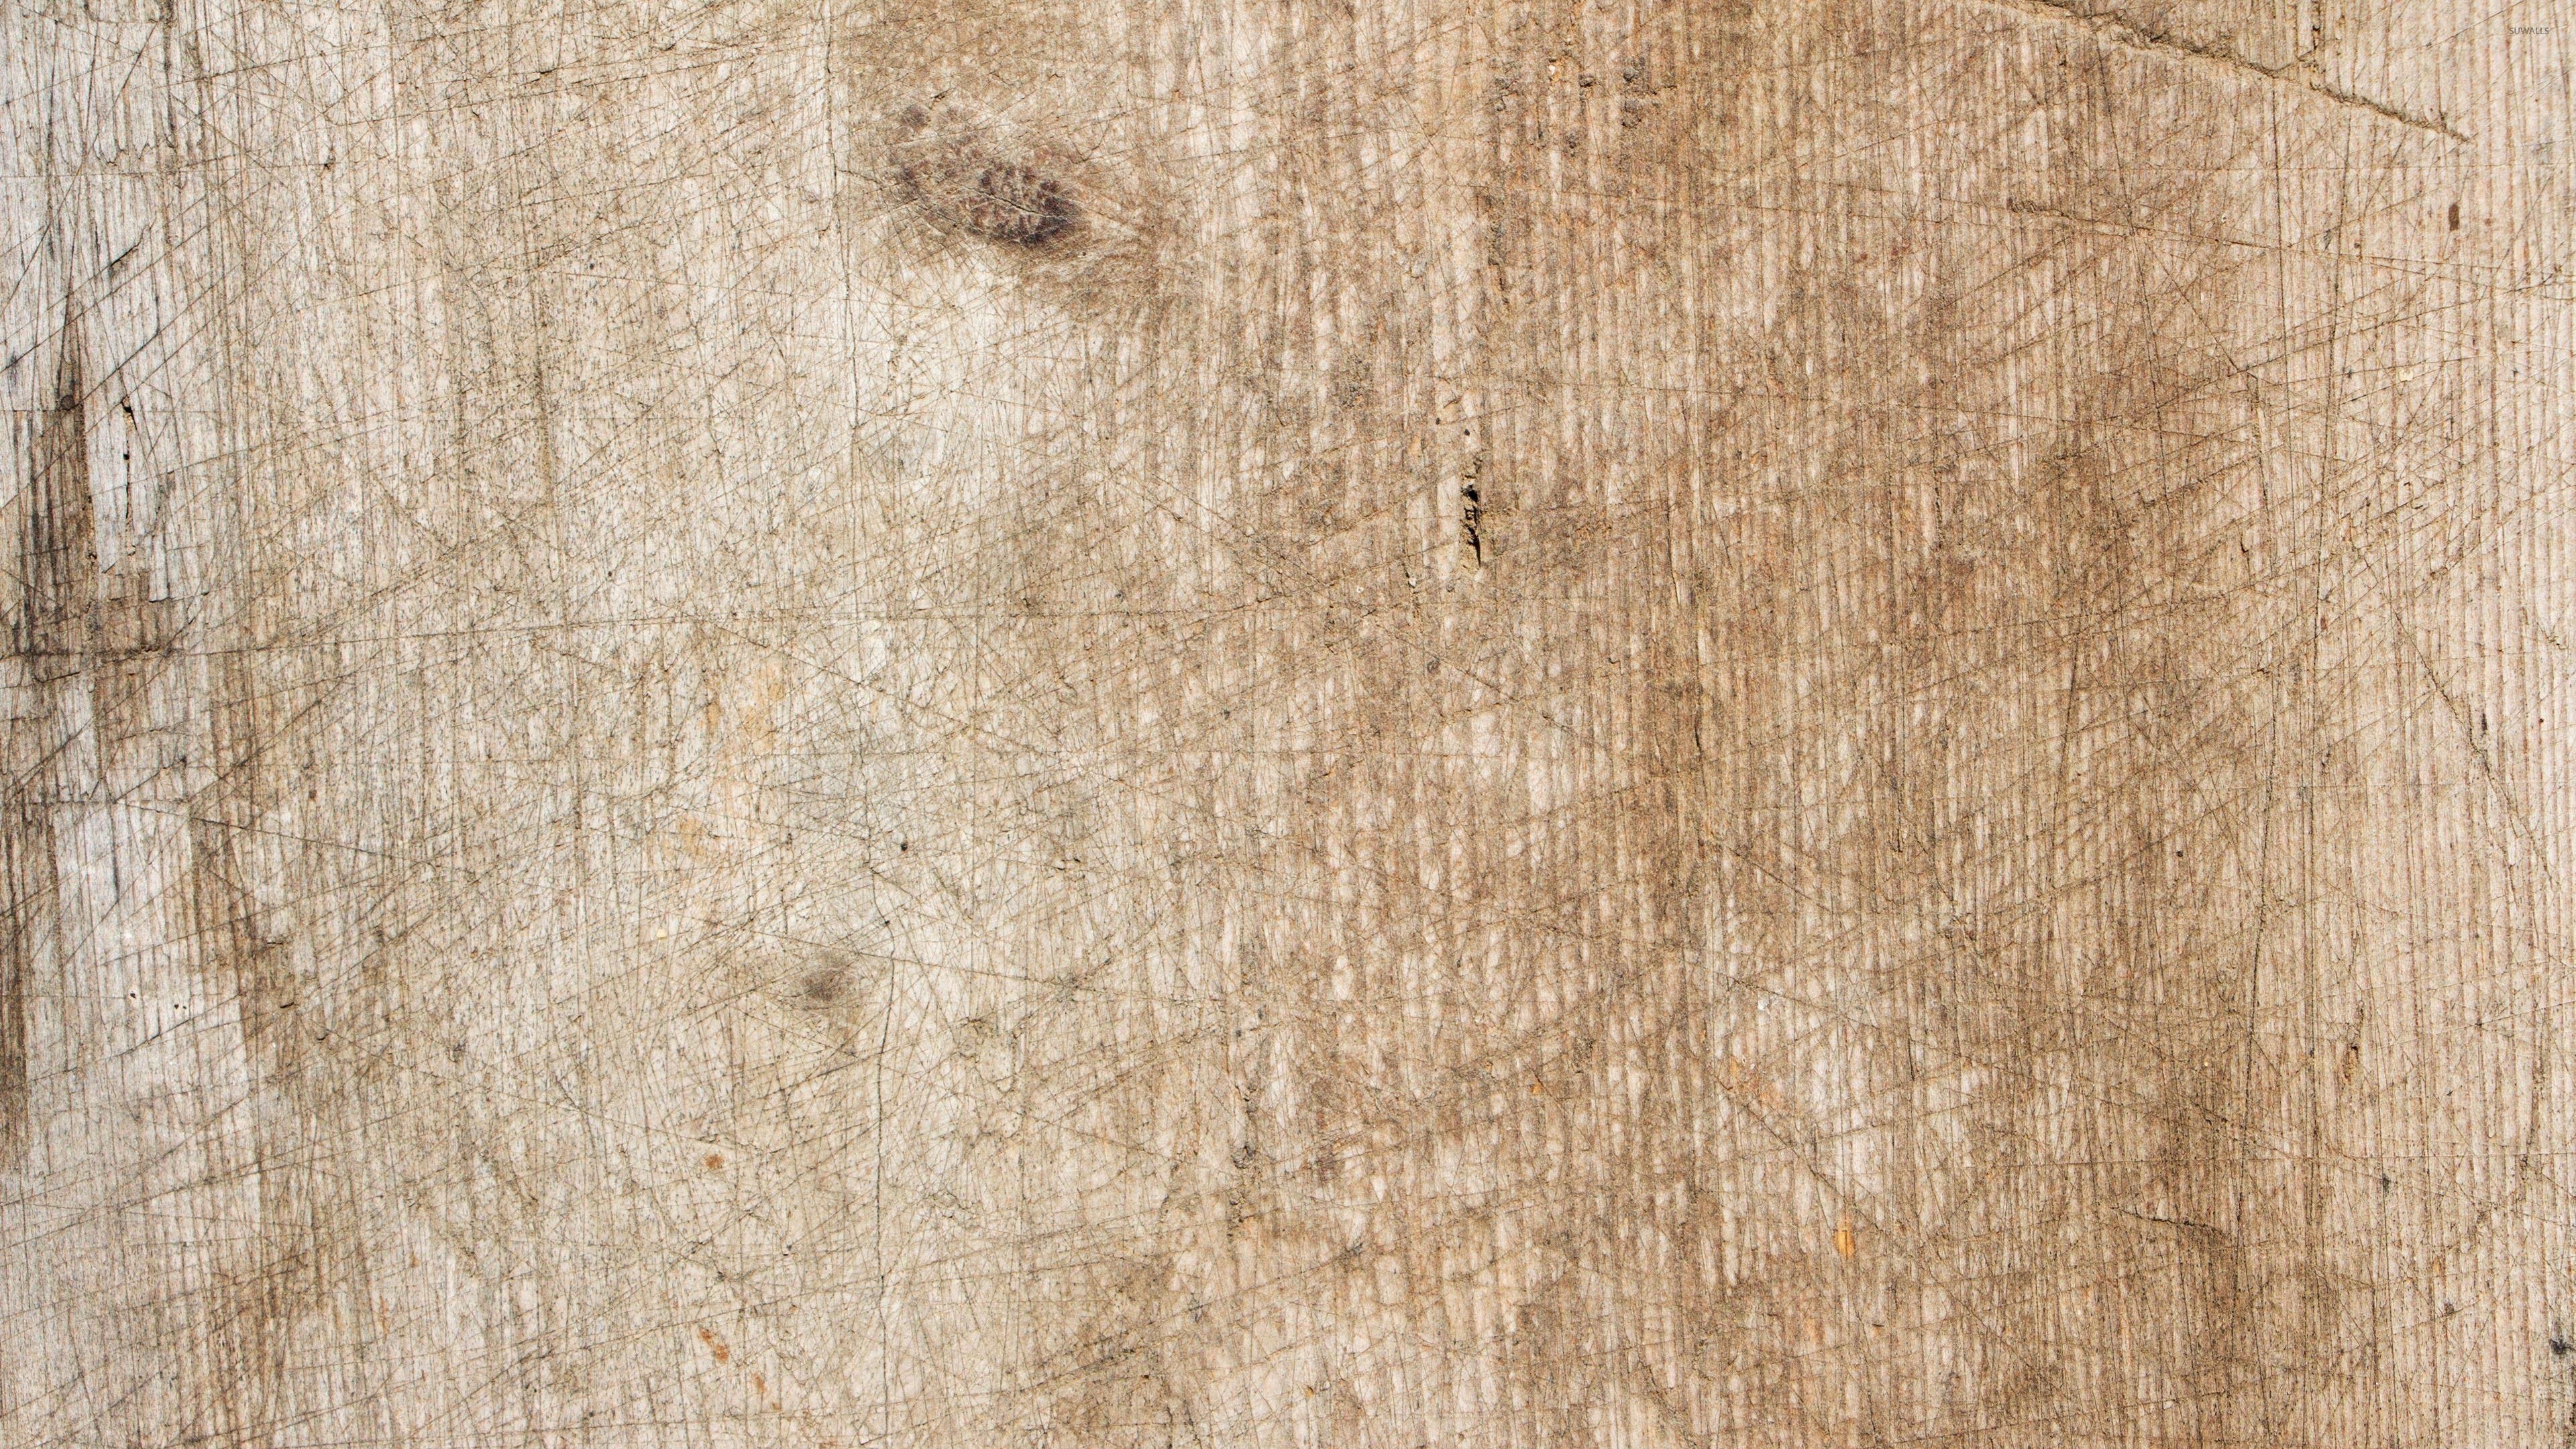 Scratches on old wood wallpaper wallpaper